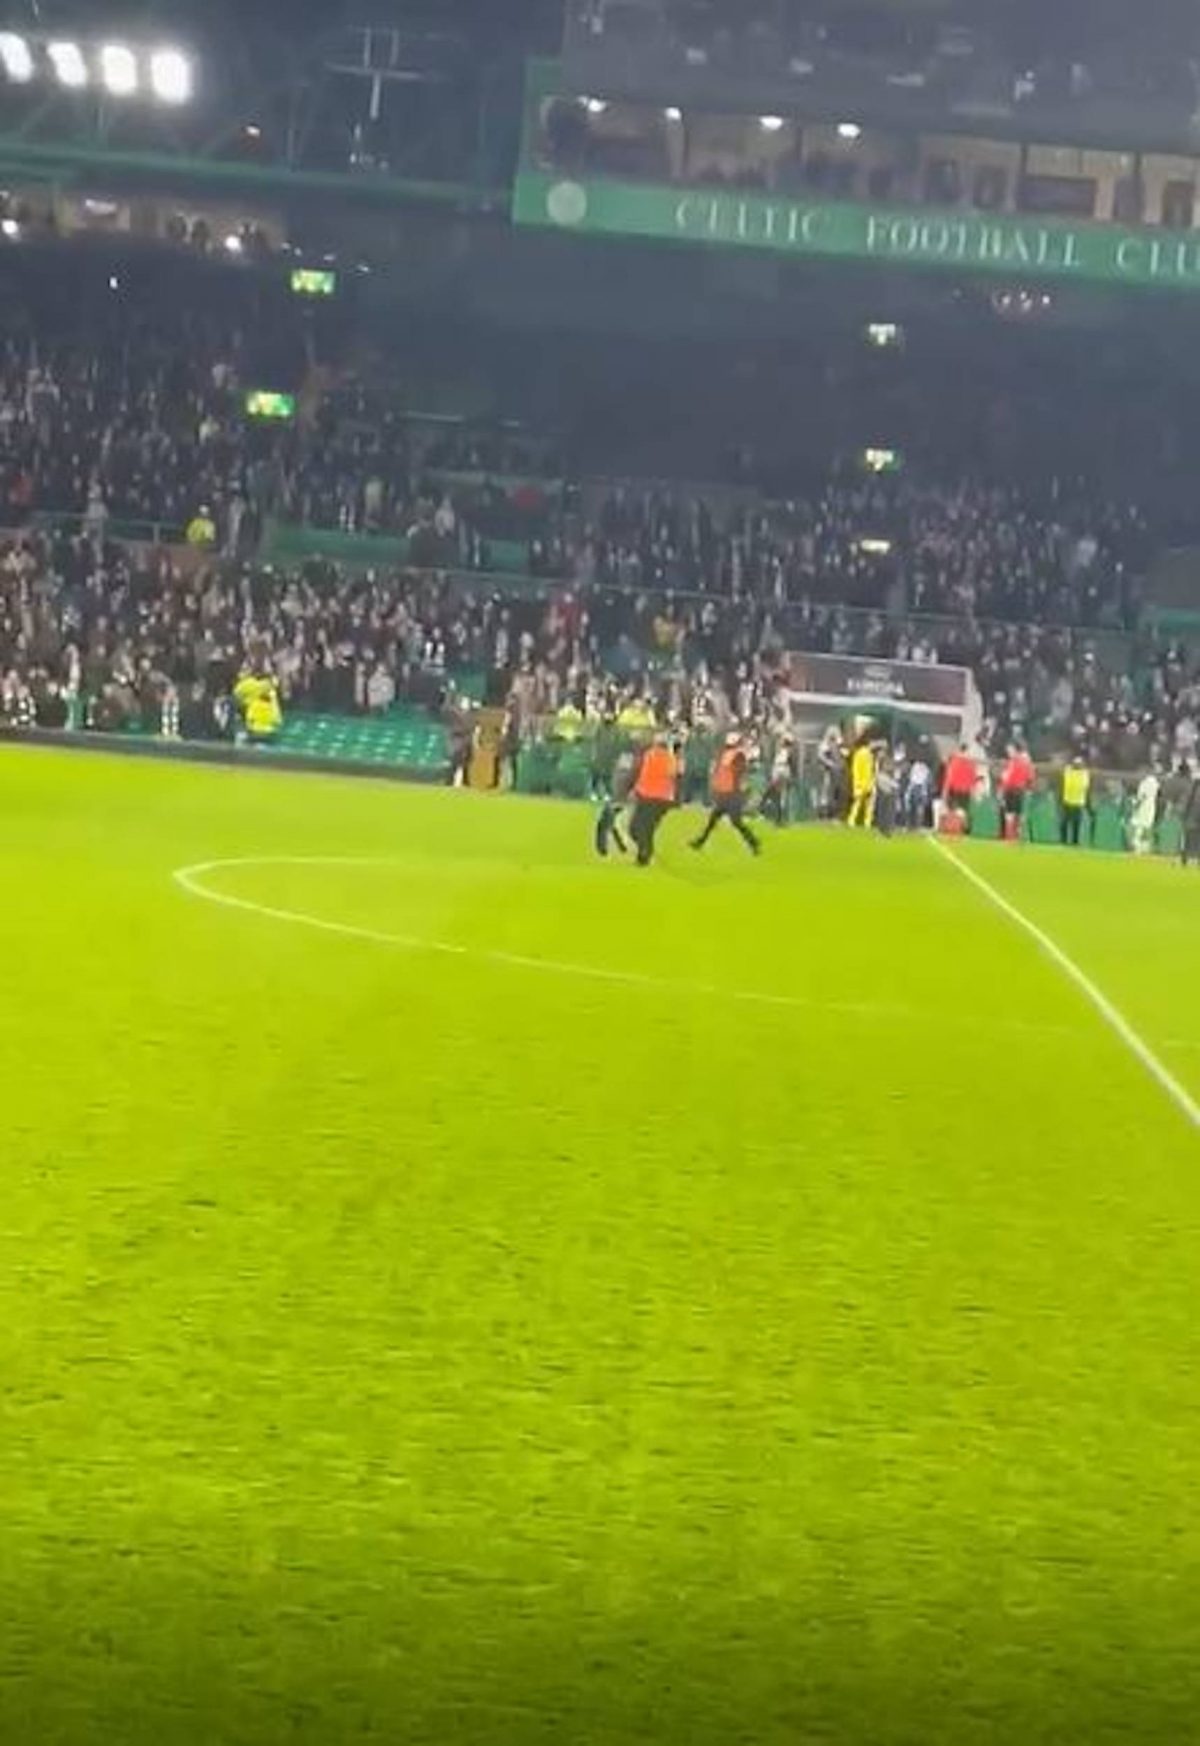 The Celtic fan is caught by the stewards